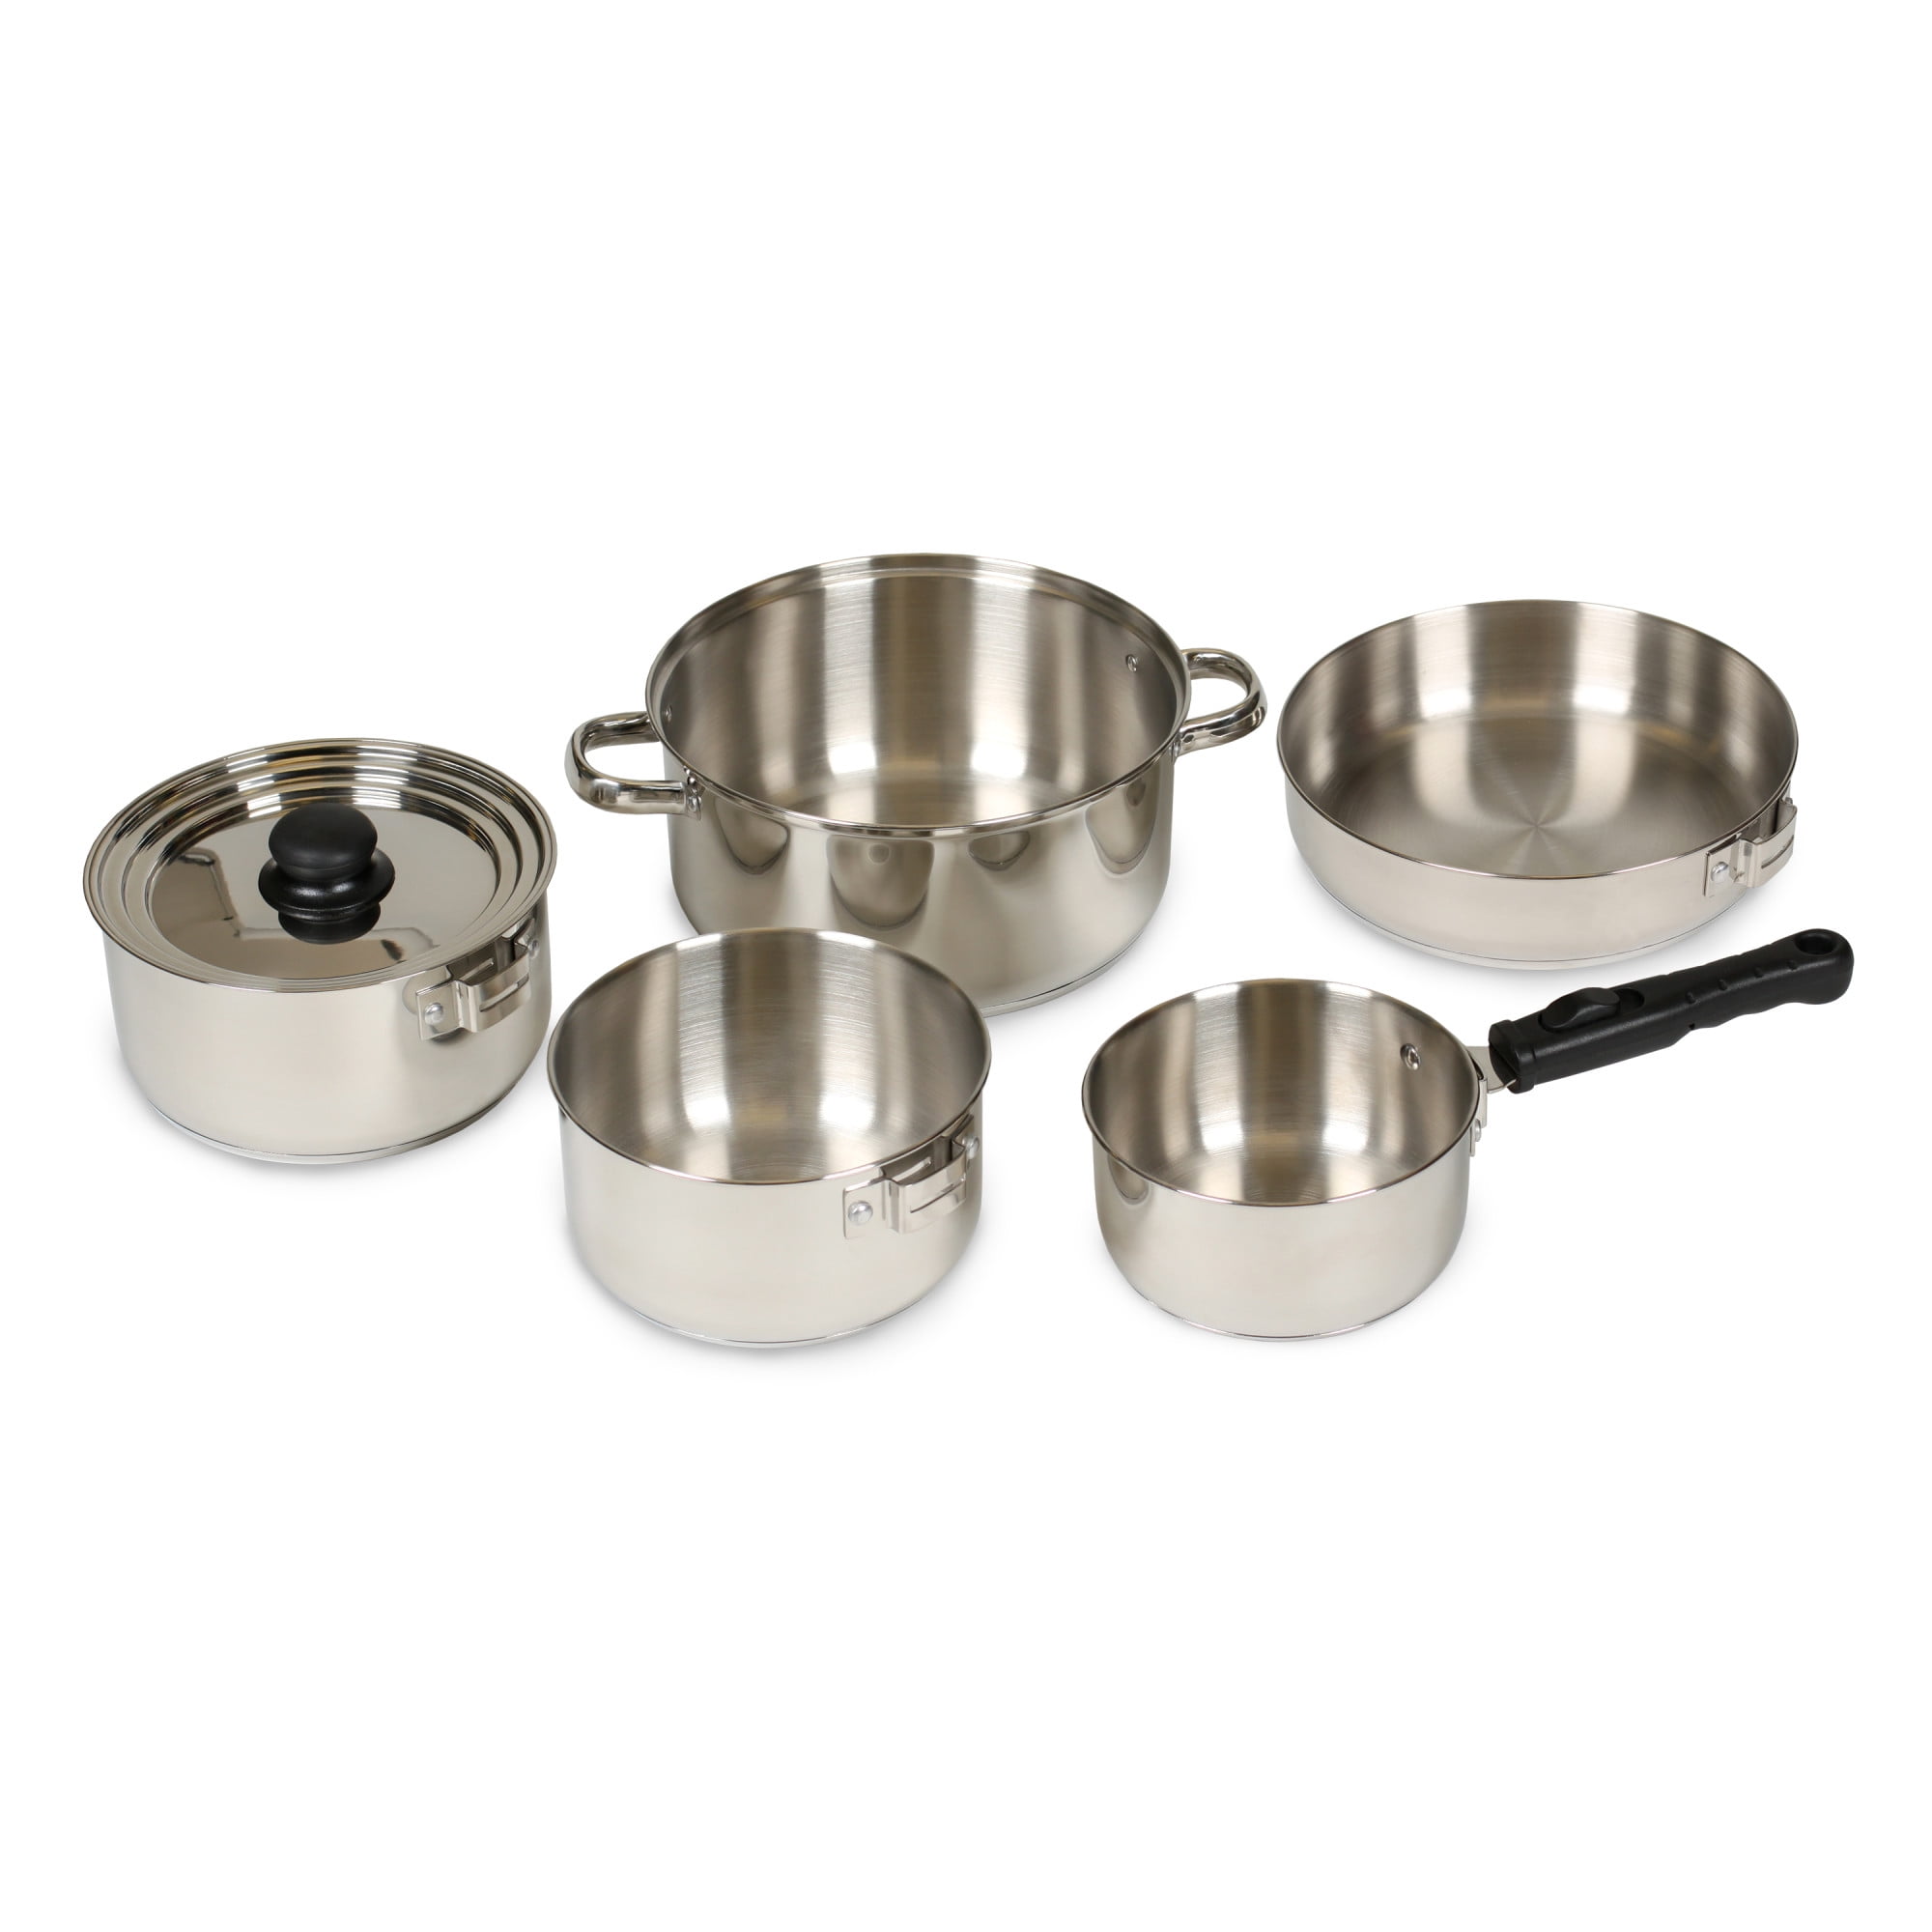 LITHIC 7-Piece Camp Cookset 